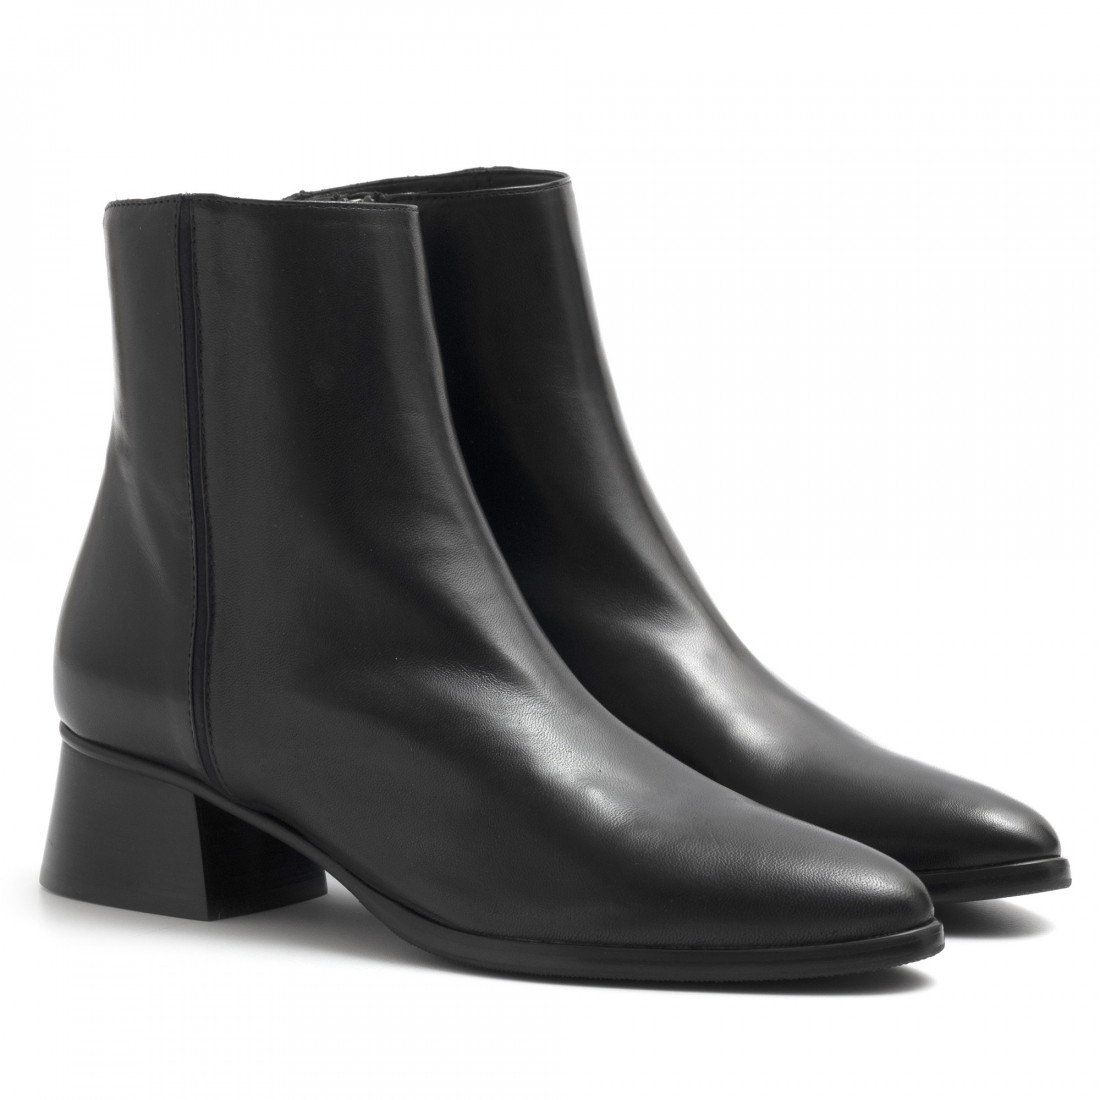 Lorenzo Masiero dark blue ankle boot in nappa leather with low heel